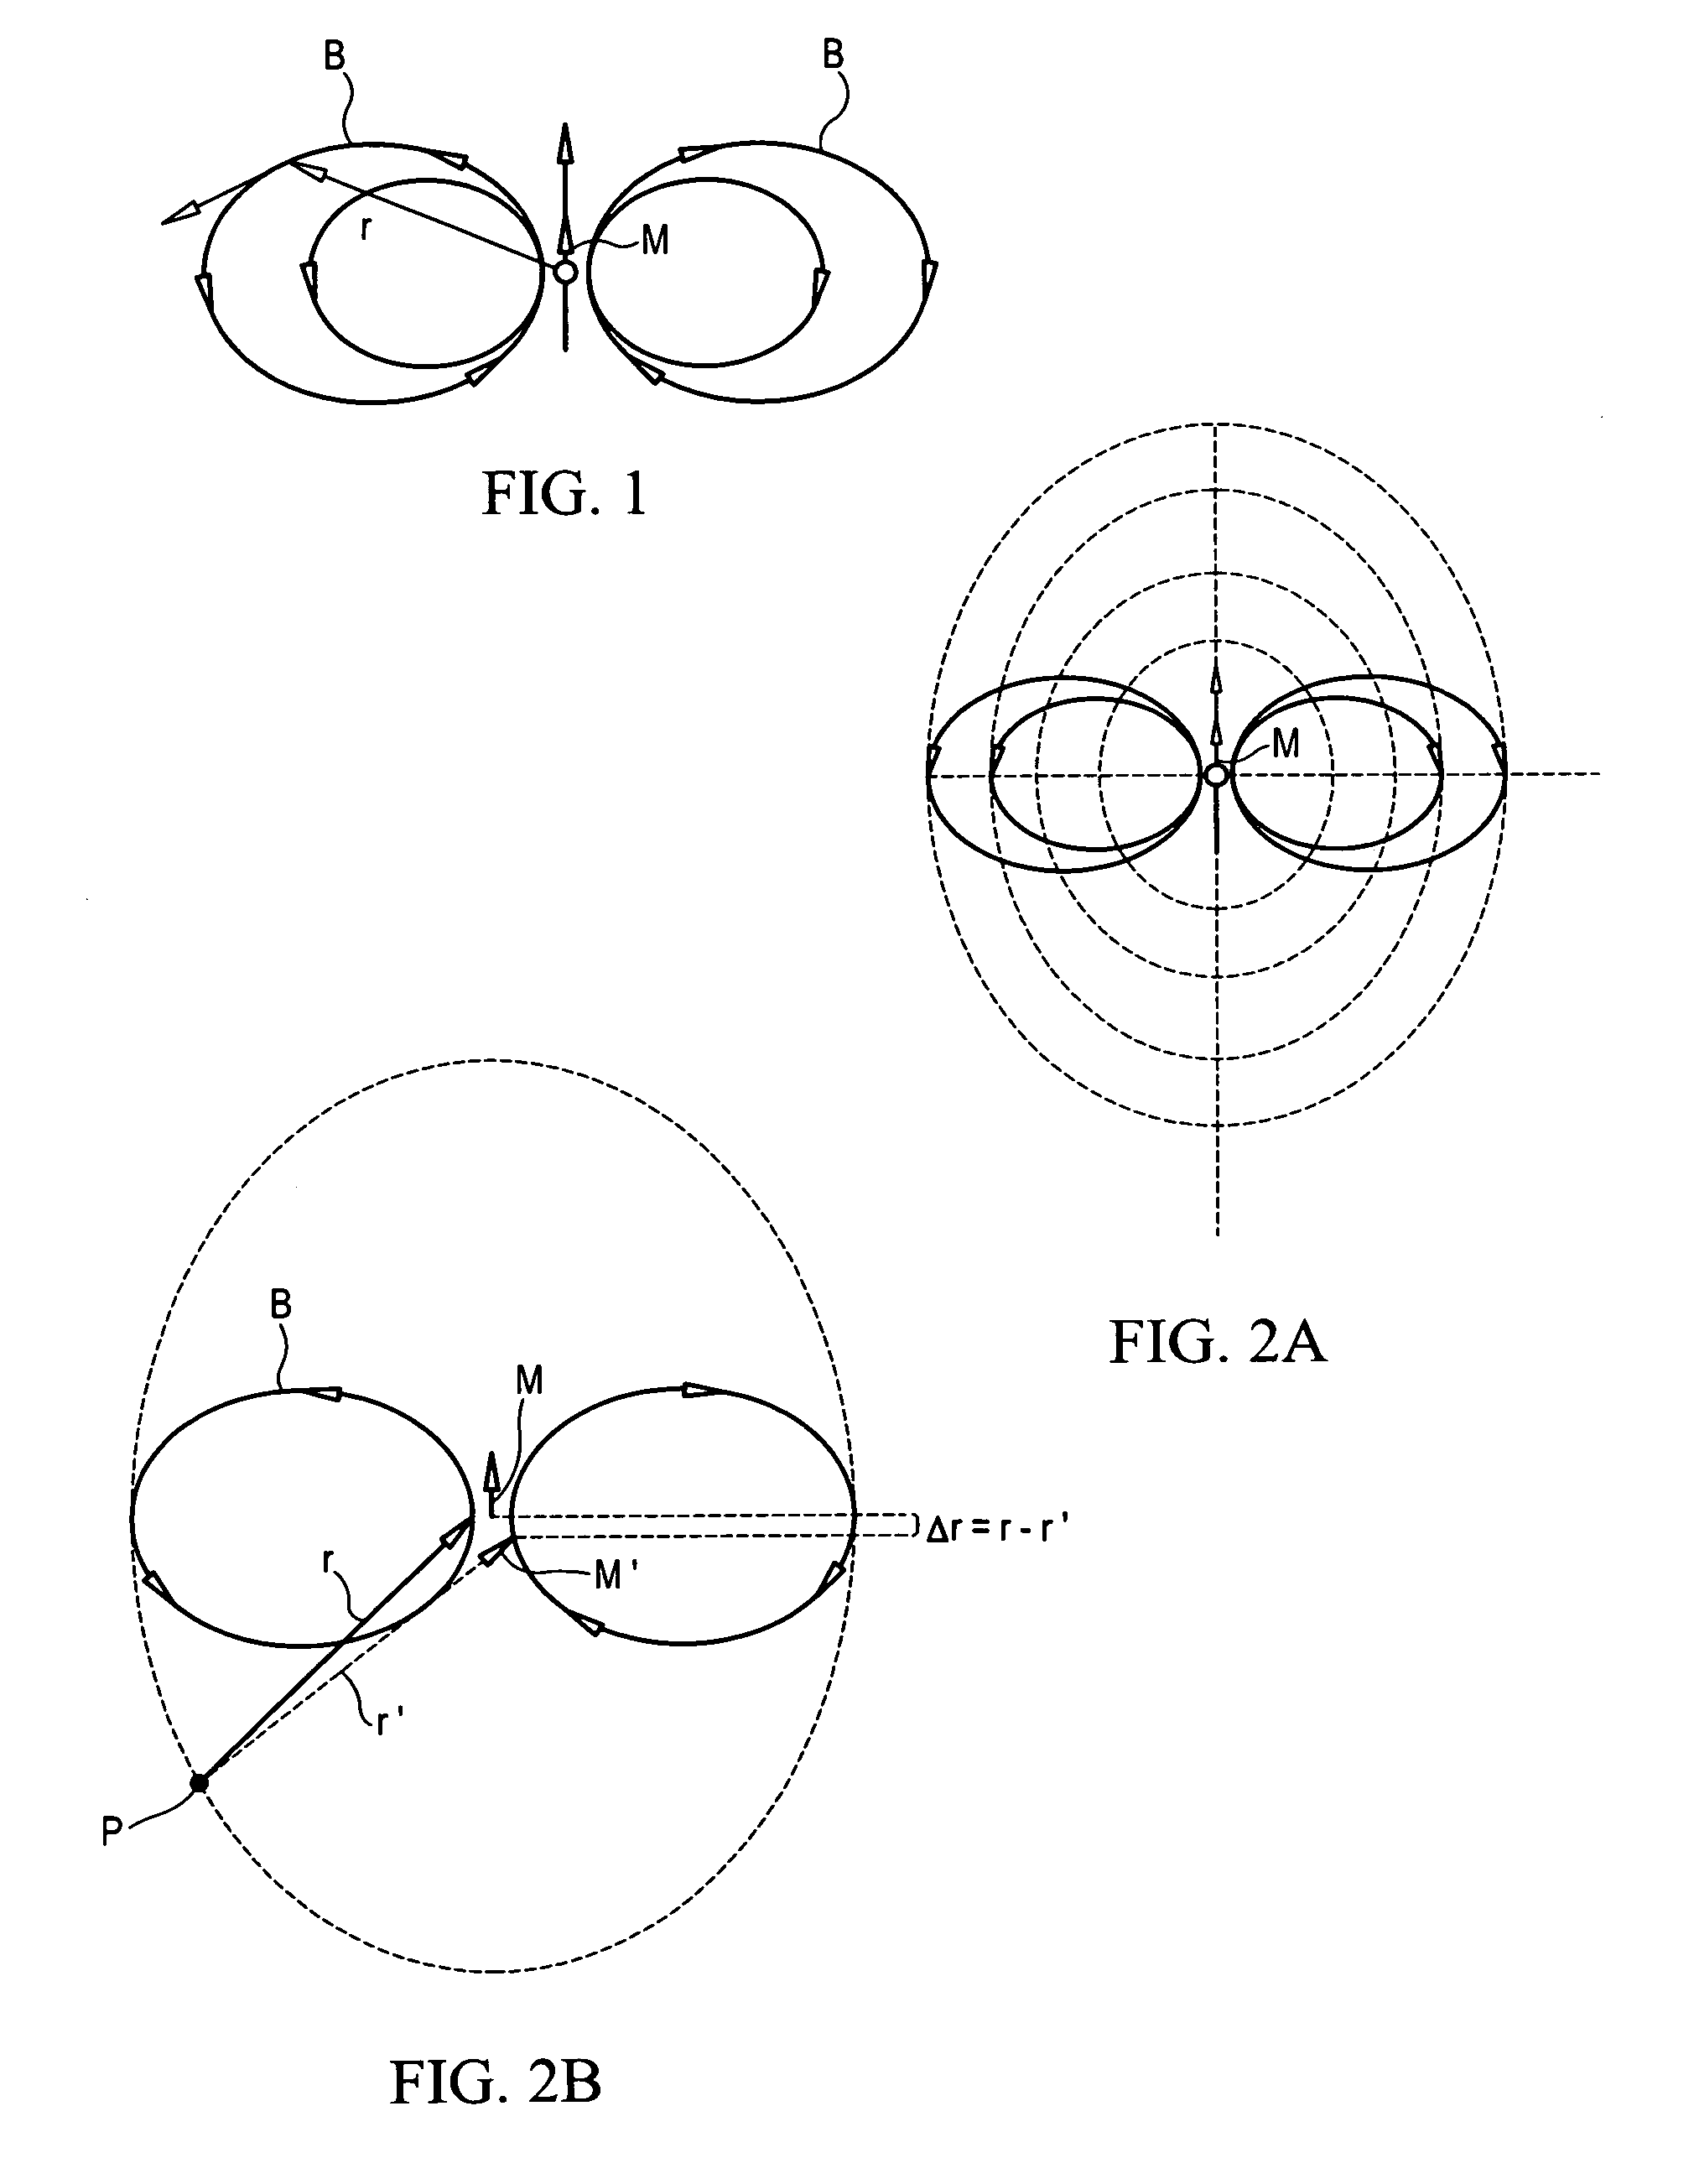 Magnetic anomaly surveillance system using spherical trilateration